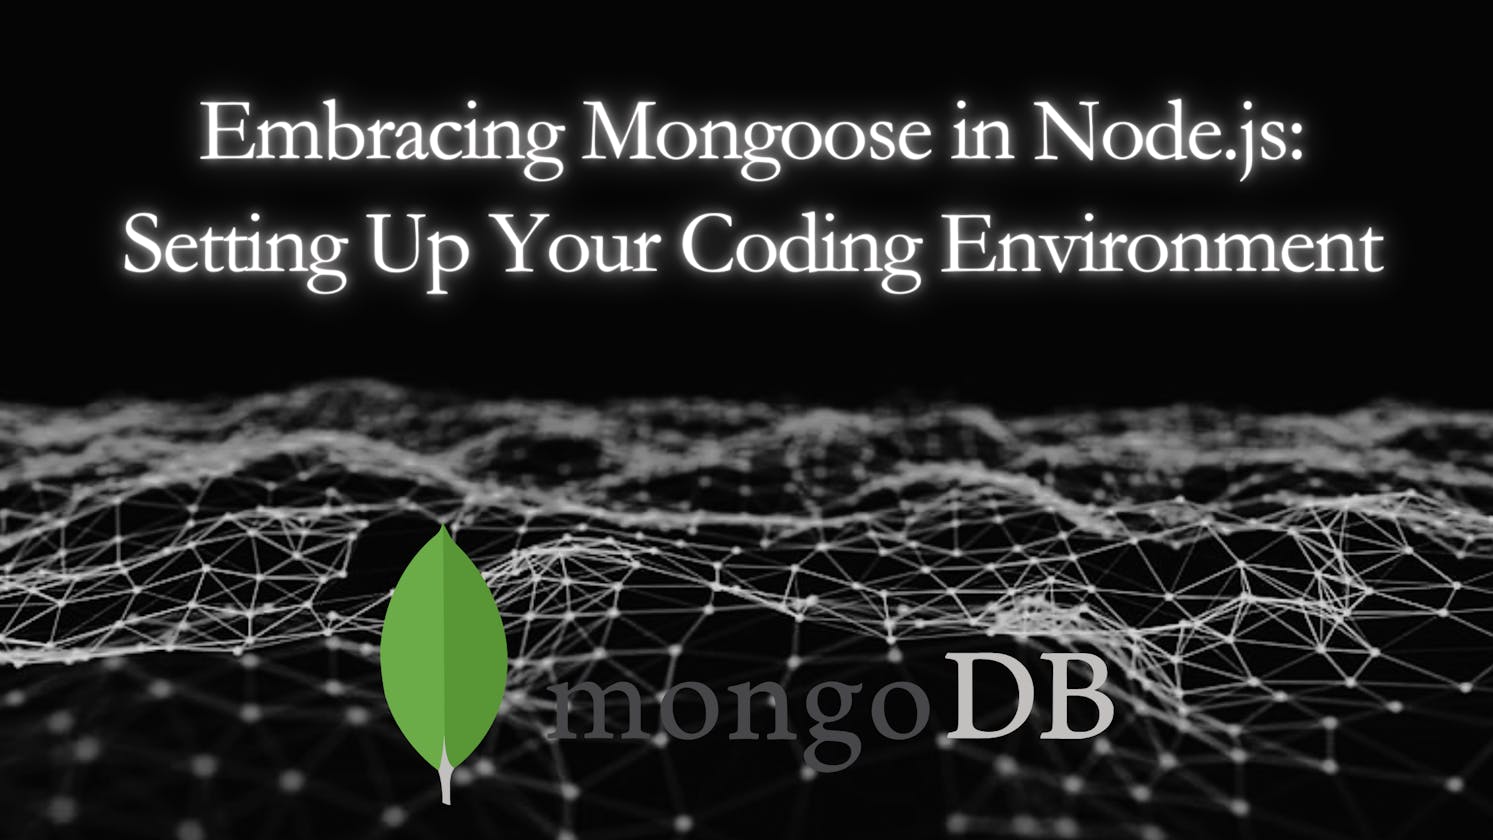 Embracing Mongoose in Node.js: Setting Up Your Coding Environment